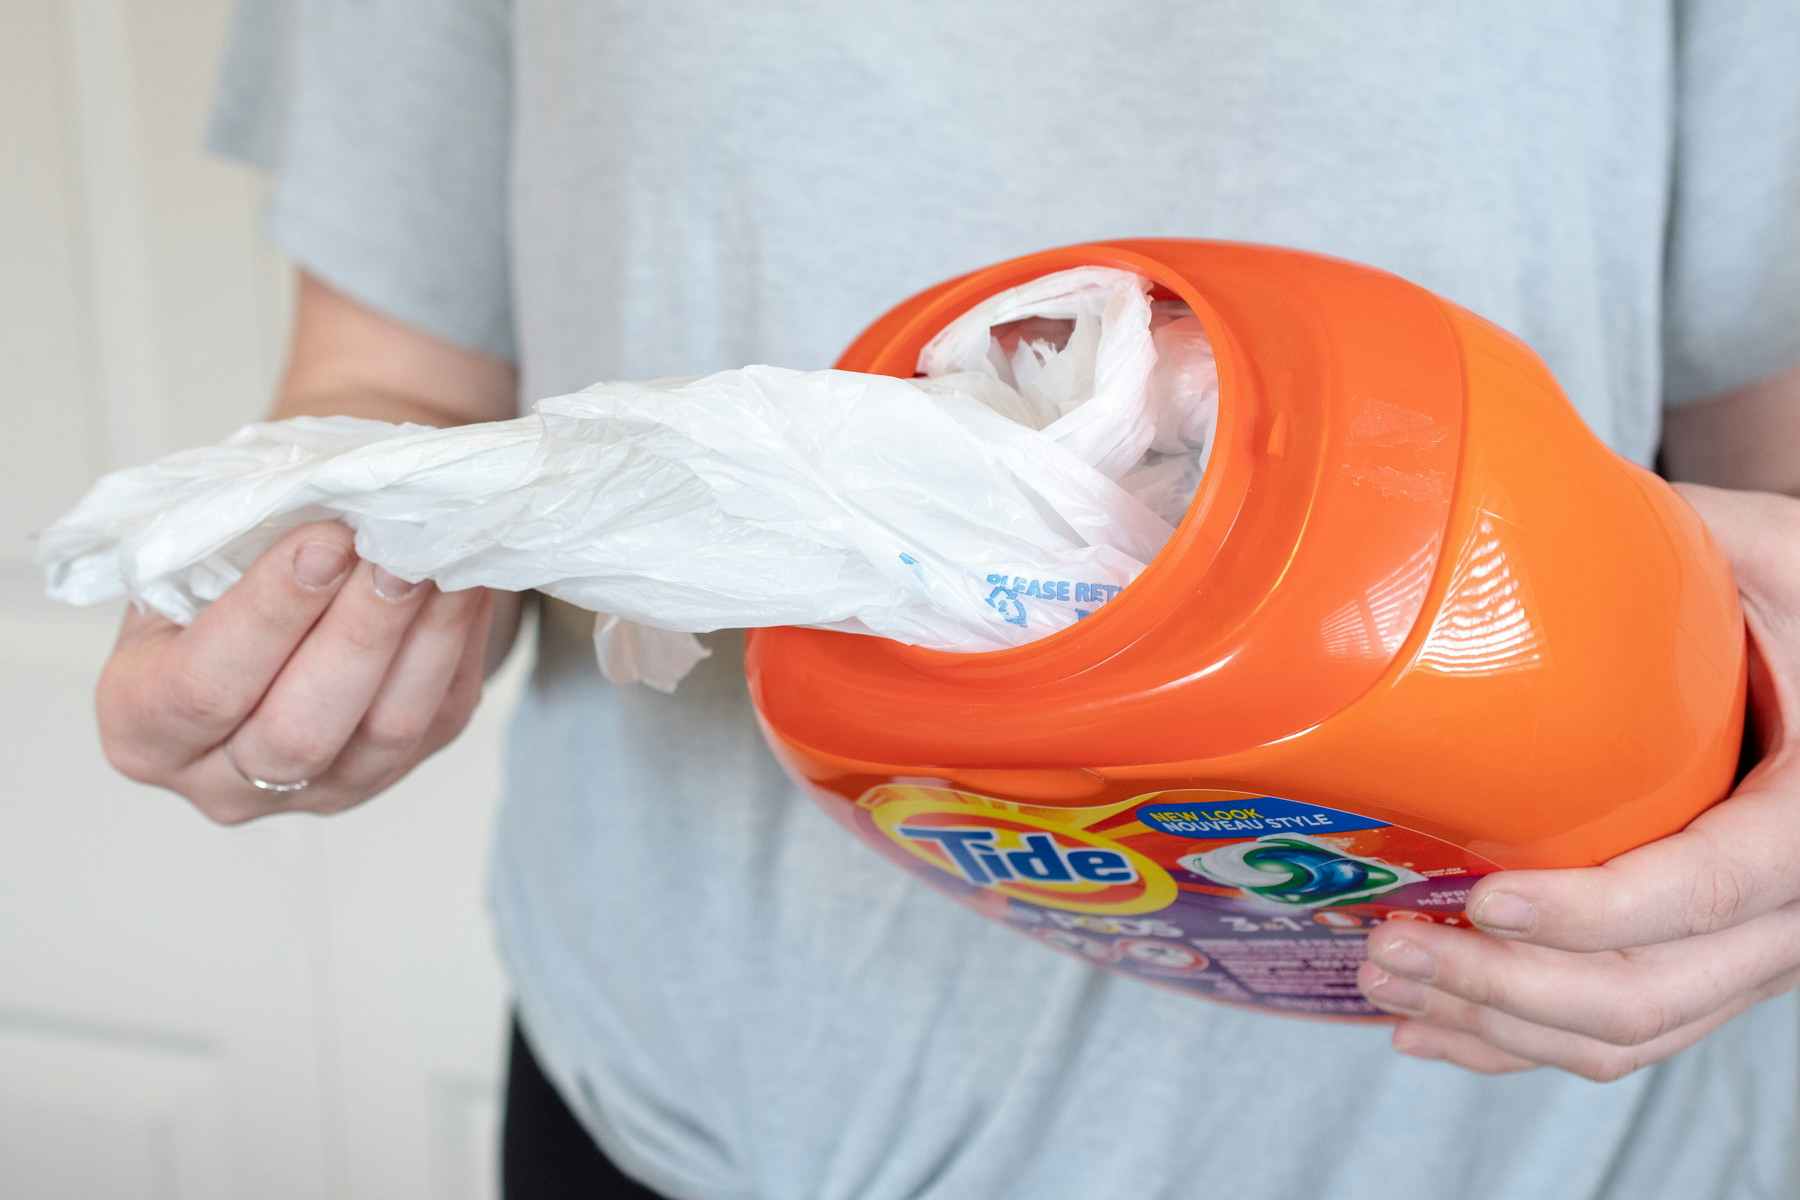 Reuse a laundry detergent bottle to store plastic grocery bags.